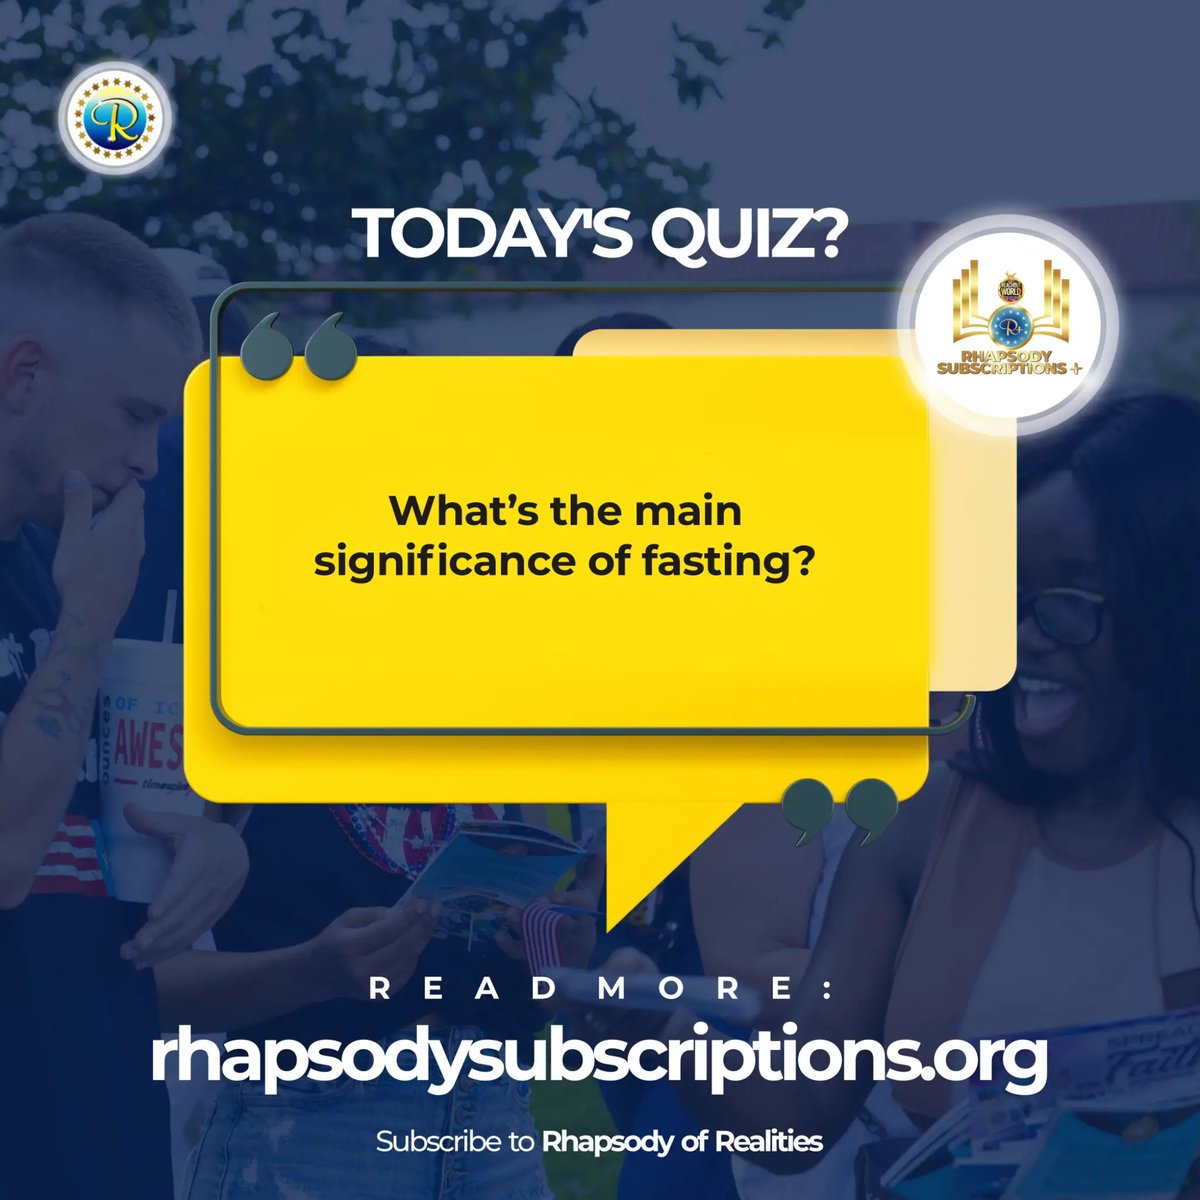 ⓉⓄⒹⒶⓎ❜Ⓢ ⓇⓄⓇ ⓆⓊⒾⓏ 

A sure way to double check how effectively you studied your Rhapsody of Realities Today! 😃😃

🎯 Retweet & Drop your answers via the comments section. Let's Go!!!

#ReachOutWorld #quiz #quizinstagram #QuizOfTheDay #RhapsodySubscription #Gaza…